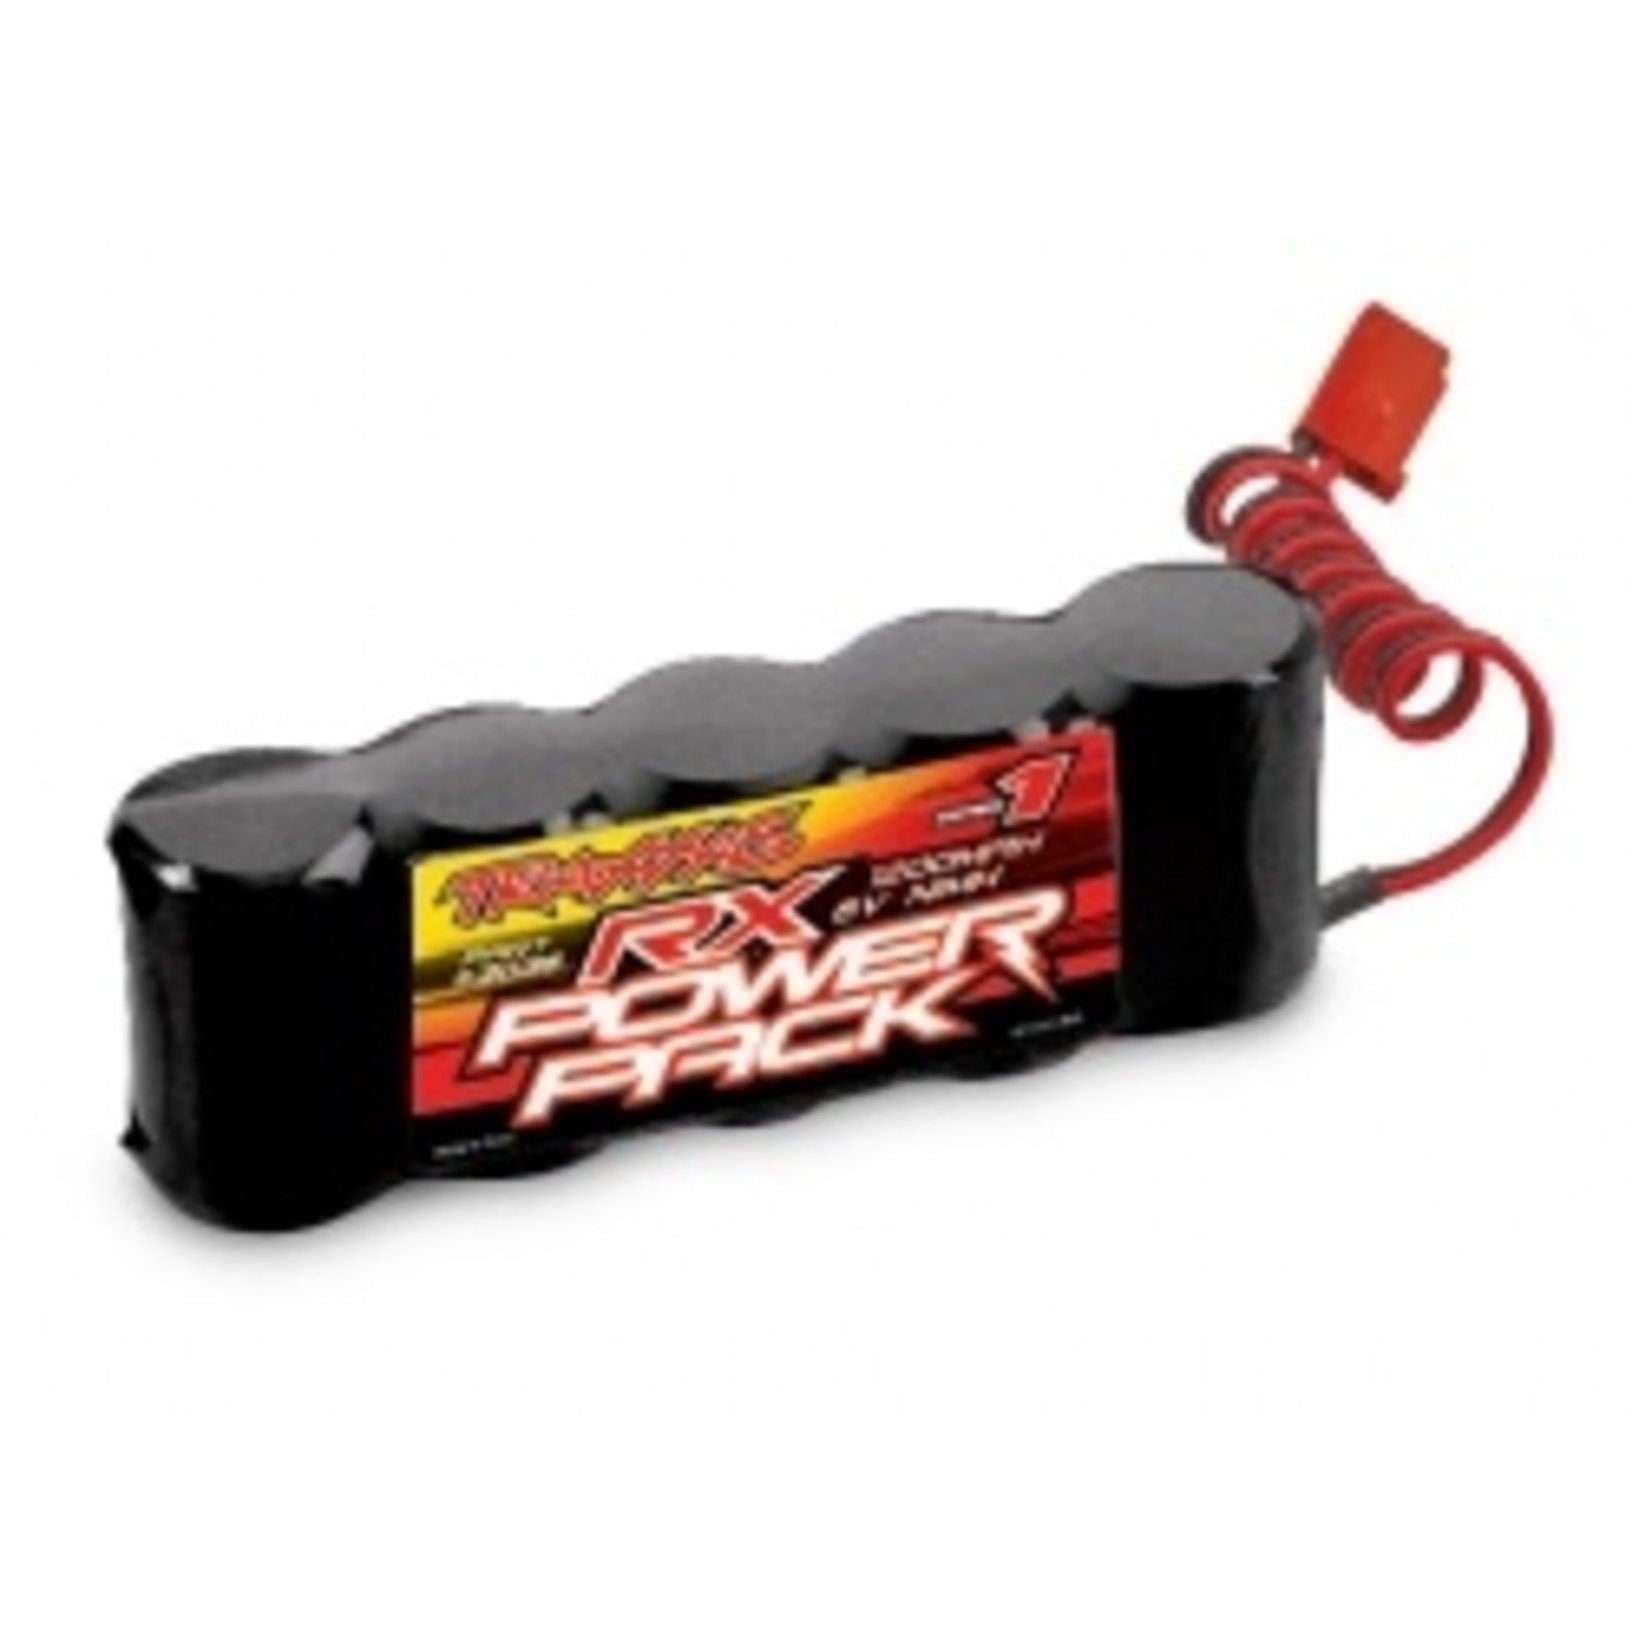 Traxxas 3036 Battery, RX Power Pack (5-cell flat style, NiMH, 1200mAh)